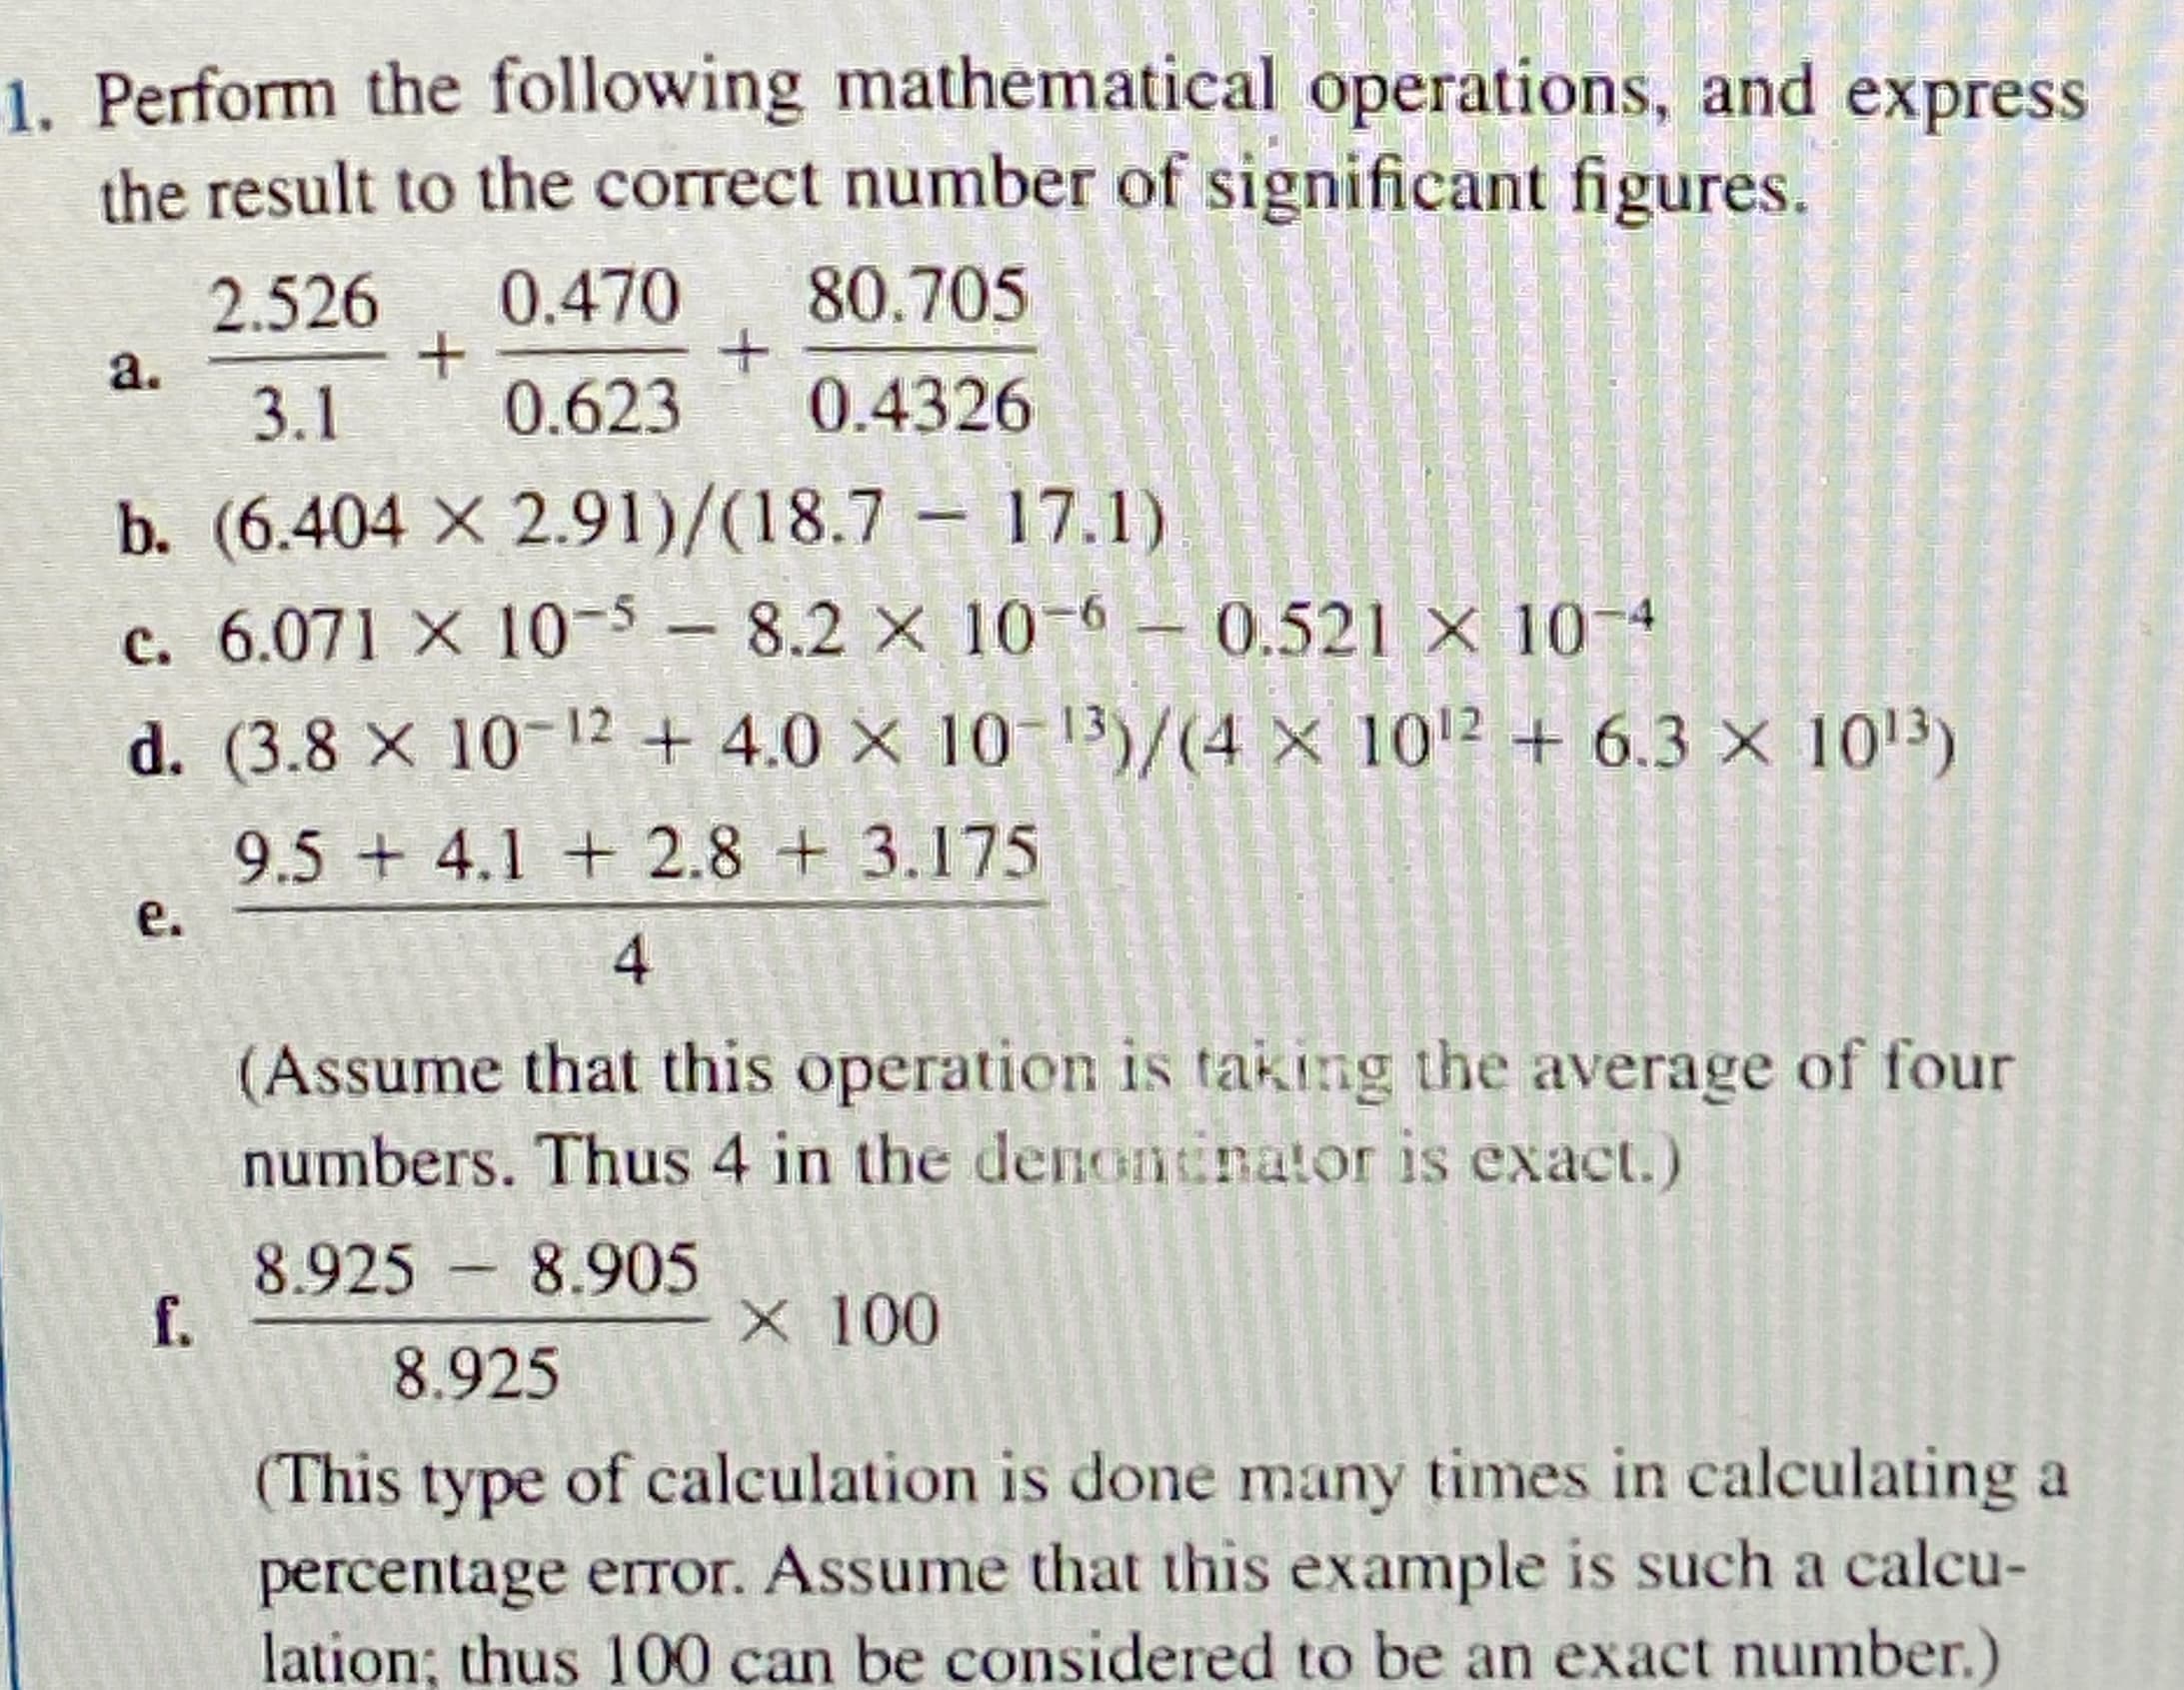 1. Perform the following mathematical operations, and express
the result to the correct number of significant figures.
2.526
0.470
80.705
a.
3.1
0.623
0.4326
b. (6.404 X 2.91)/(18.7 – 17.1)
c. 6.071 X 10-5- 8.2 x 10-6- 0.521 x 10-4
d. (3.8 X 10-12 + 4.0 × 10-13)/(4 × 1012 + 6.3 × 1013)
9.5 + 4.1 + 2.8 + 3.175
